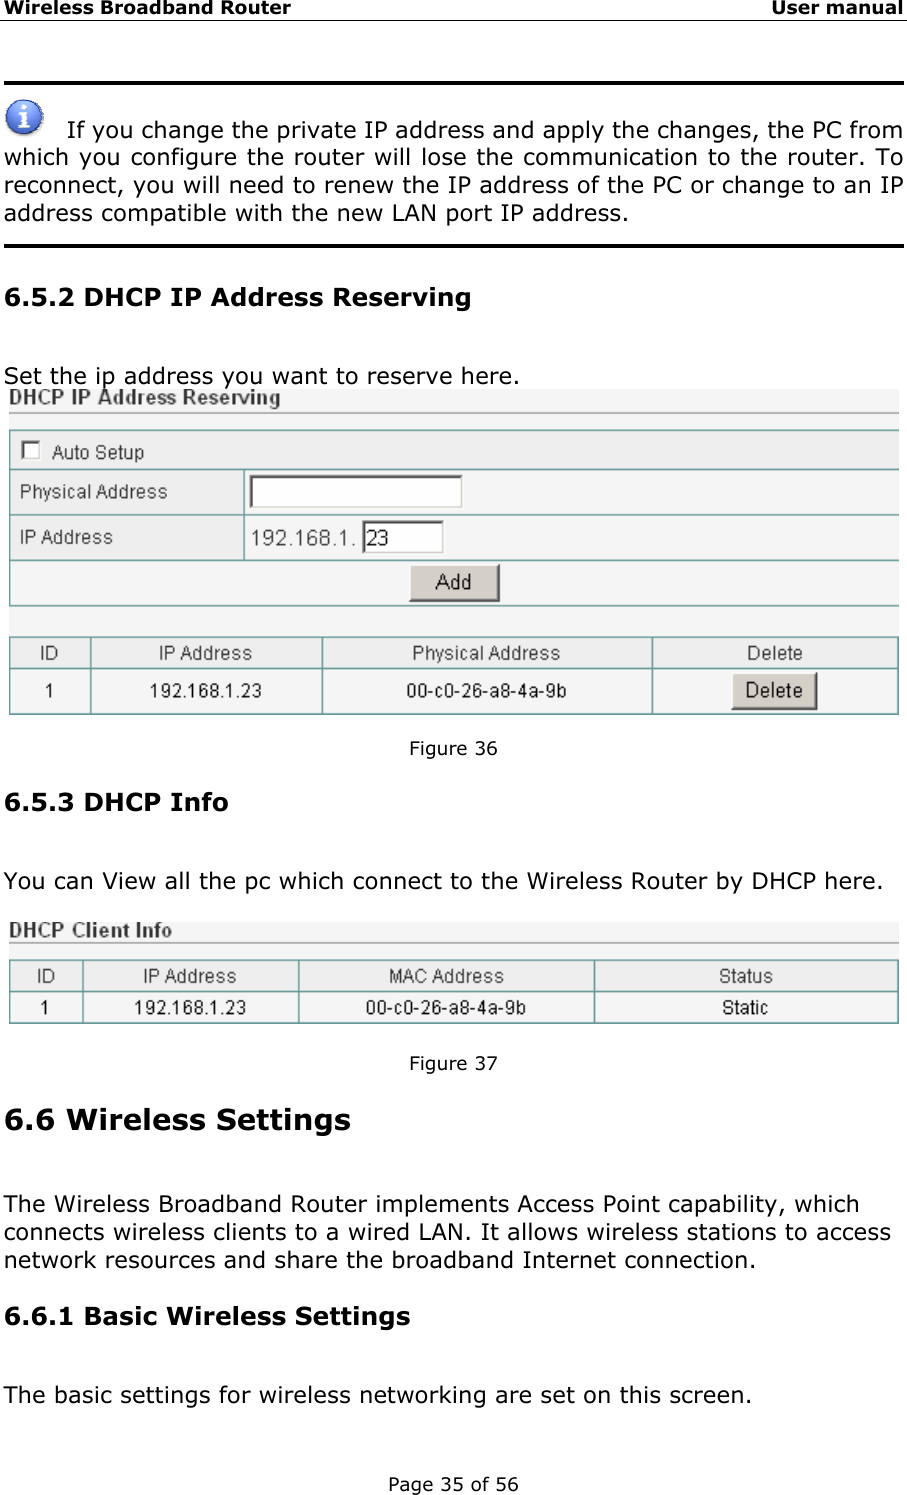 Wireless Broadband Router                                                   User manual Page 35 of 56      If you change the private IP address and apply the changes, the PC from which you configure the router will lose the communication to the router. To reconnect, you will need to renew the IP address of the PC or change to an IP address compatible with the new LAN port IP address.  6.5.2 DHCP IP Address Reserving Set the ip address you want to reserve here.   Figure 36 6.5.3 DHCP Info You can View all the pc which connect to the Wireless Router by DHCP here.    Figure 37 6.6 Wireless Settings The Wireless Broadband Router implements Access Point capability, which connects wireless clients to a wired LAN. It allows wireless stations to access network resources and share the broadband Internet connection. 6.6.1 Basic Wireless Settings The basic settings for wireless networking are set on this screen. 